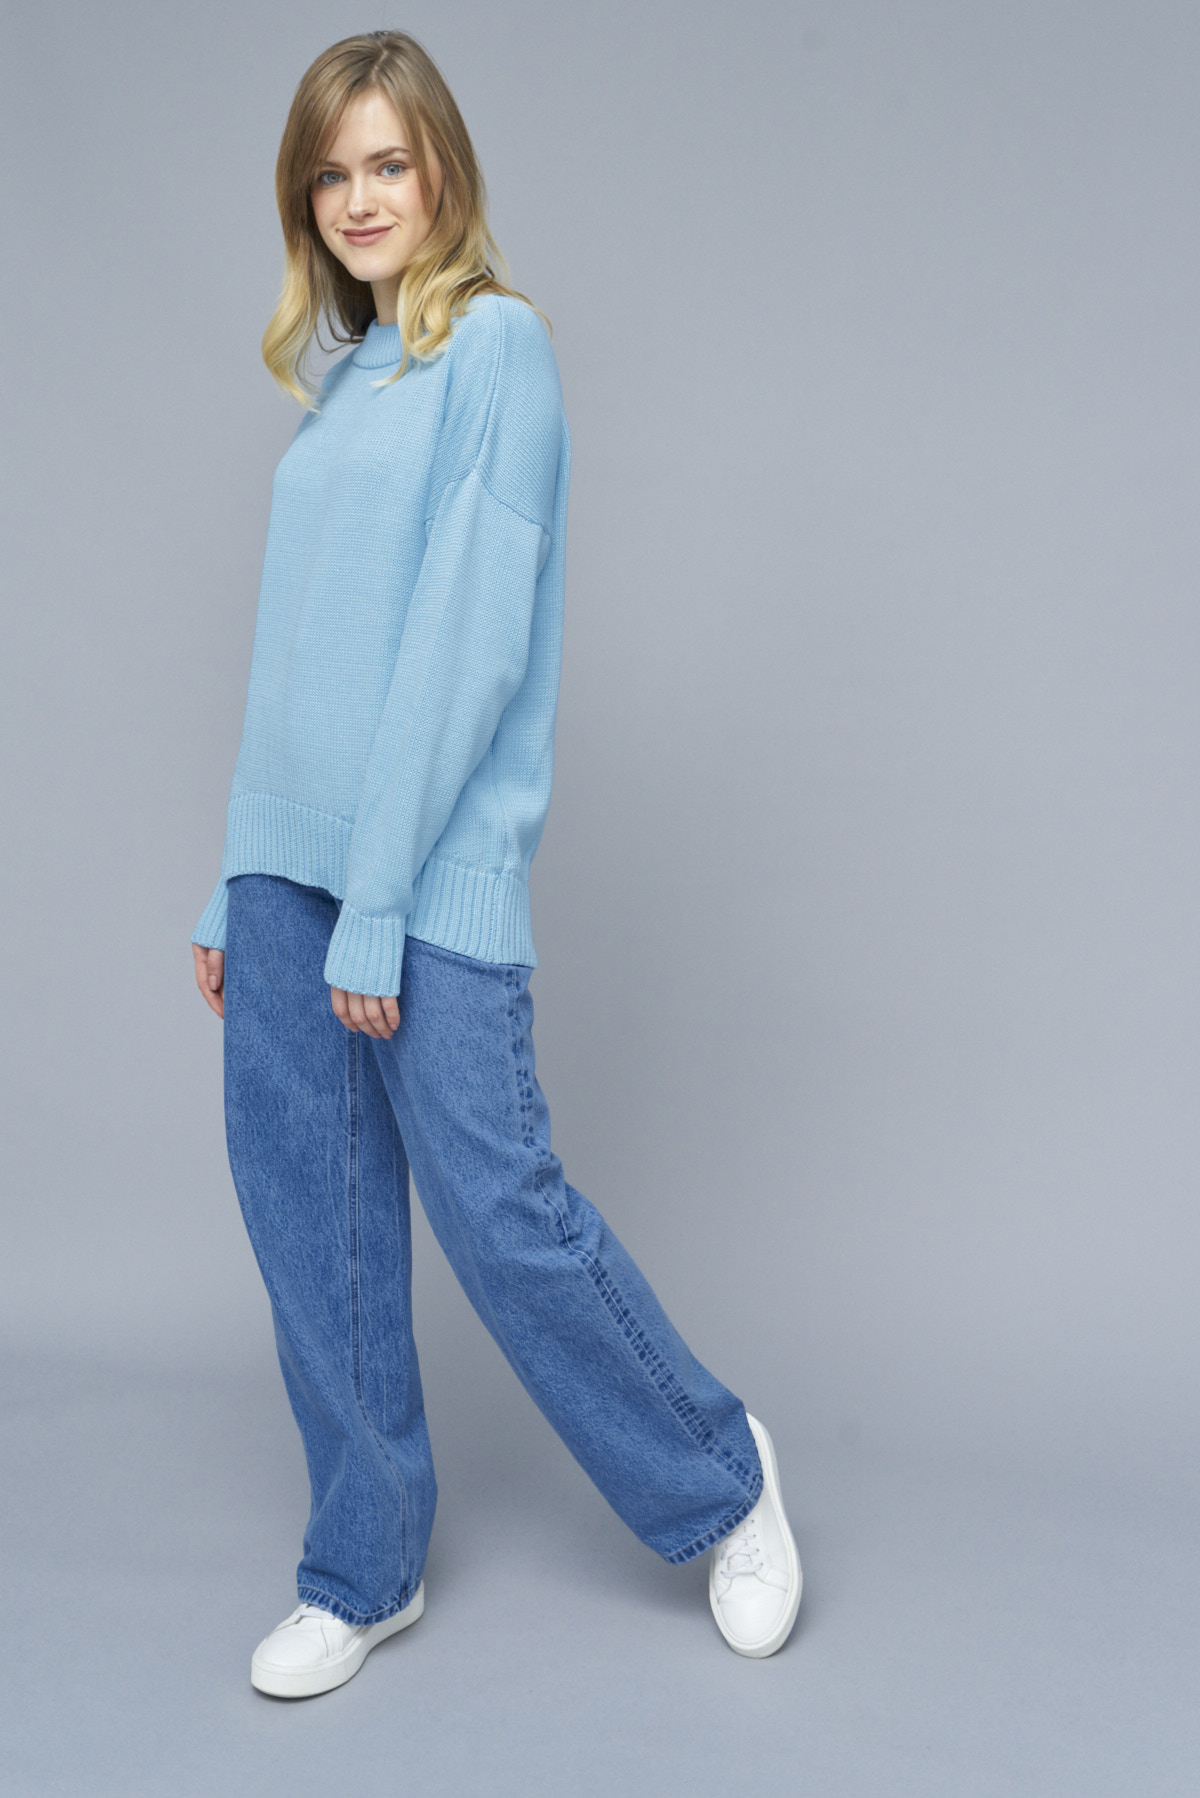 Blue knitted cotton sweater, photo 1